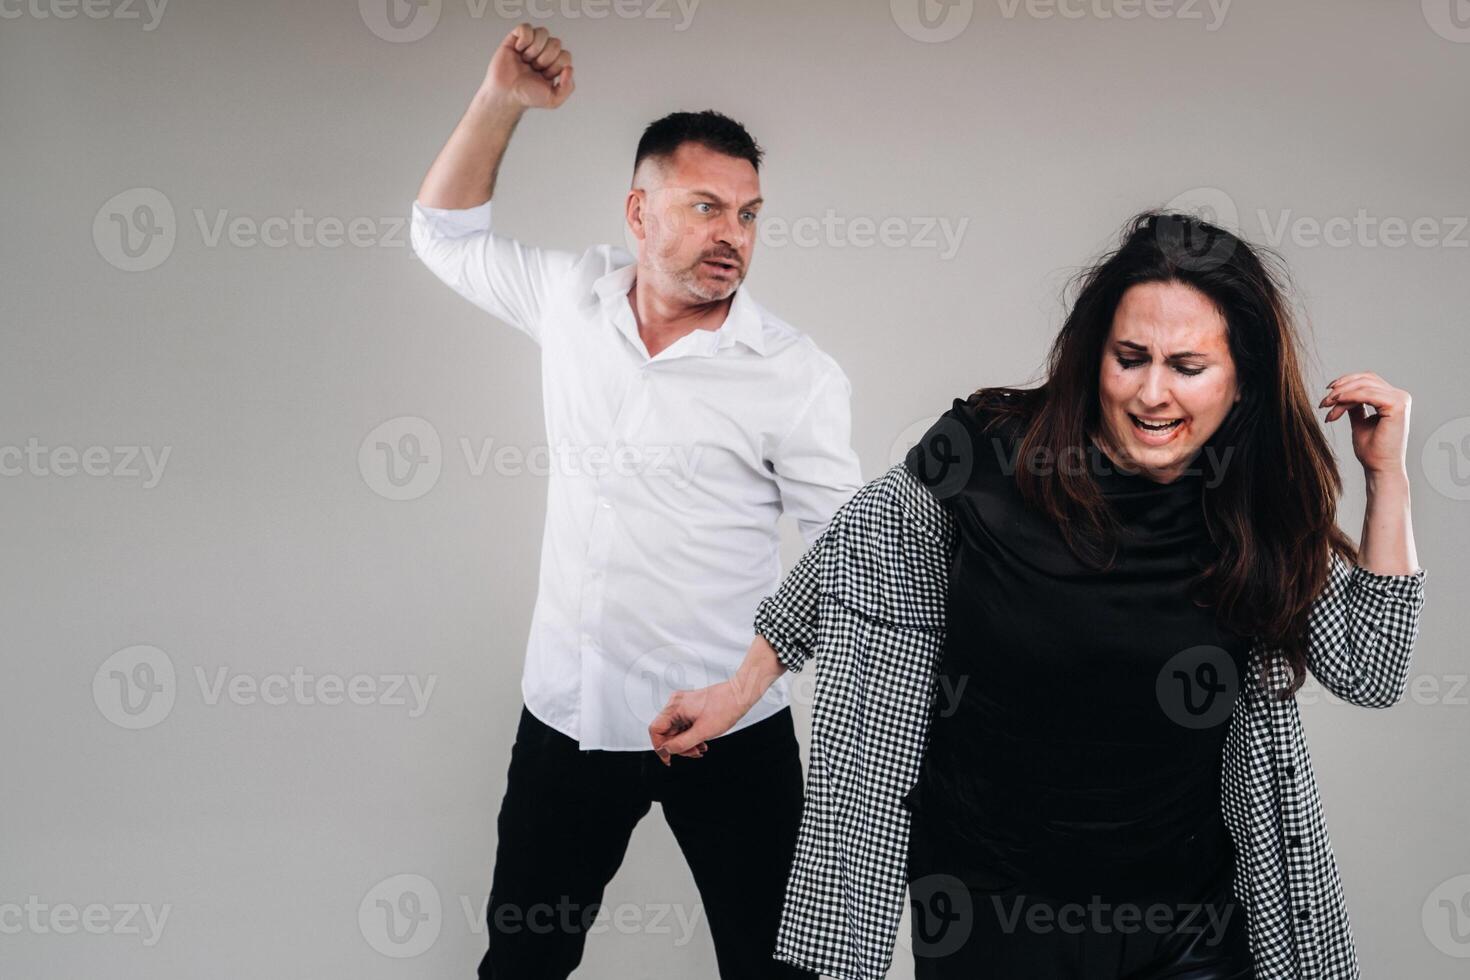 A man swings his hand at a battered woman standing on a gray background. Domestic violence photo